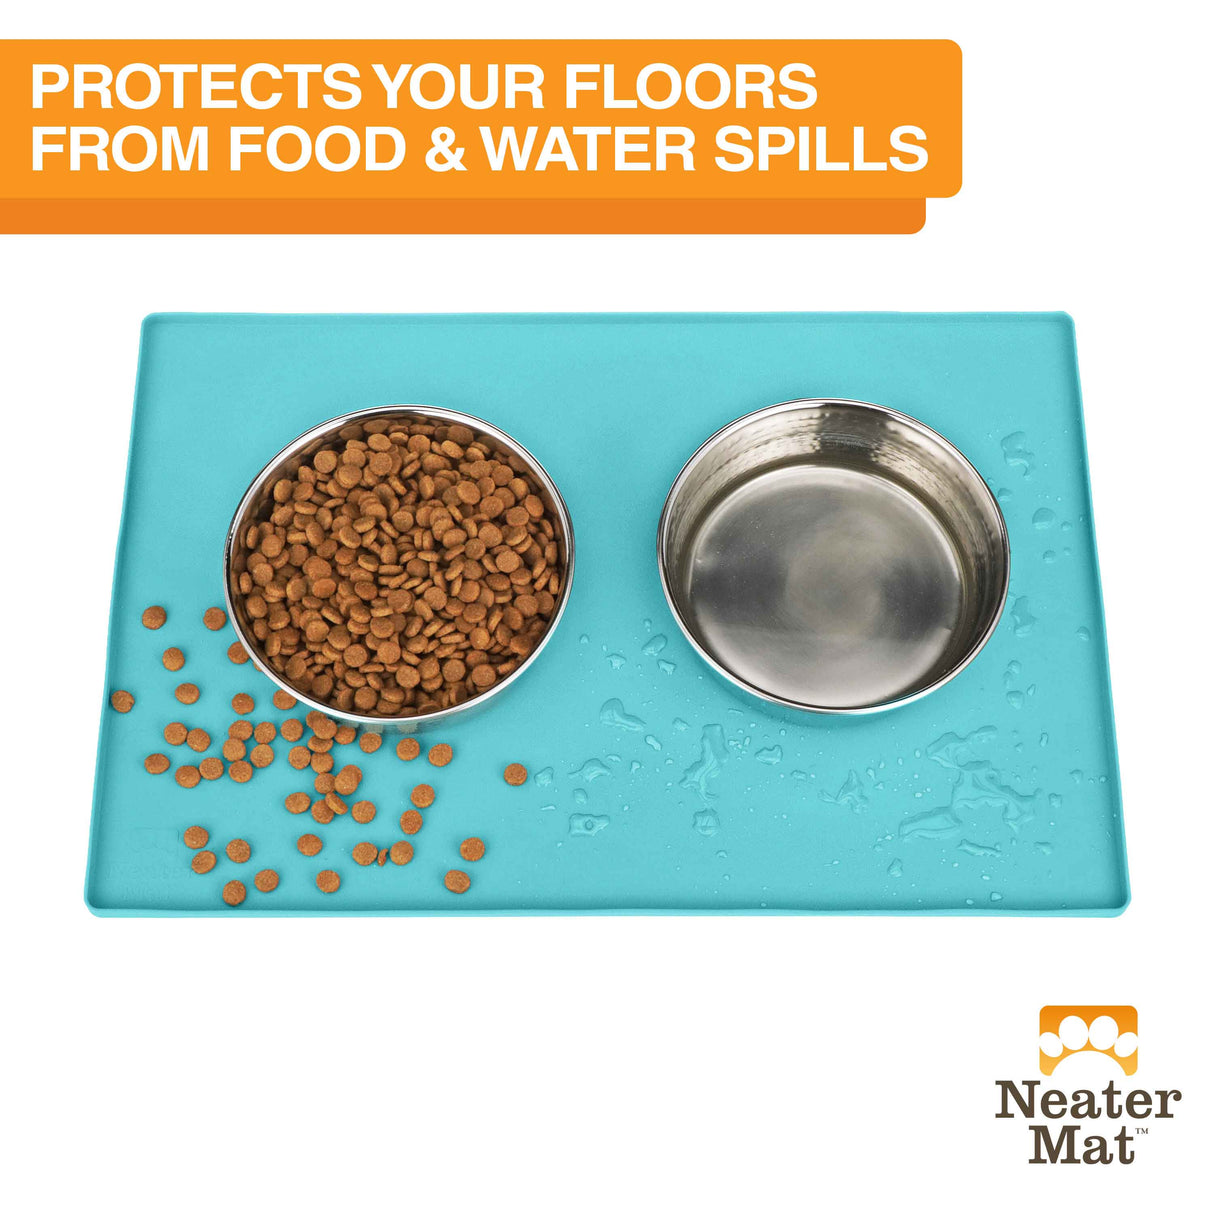 Neater Mat protects your floors from food and water spills